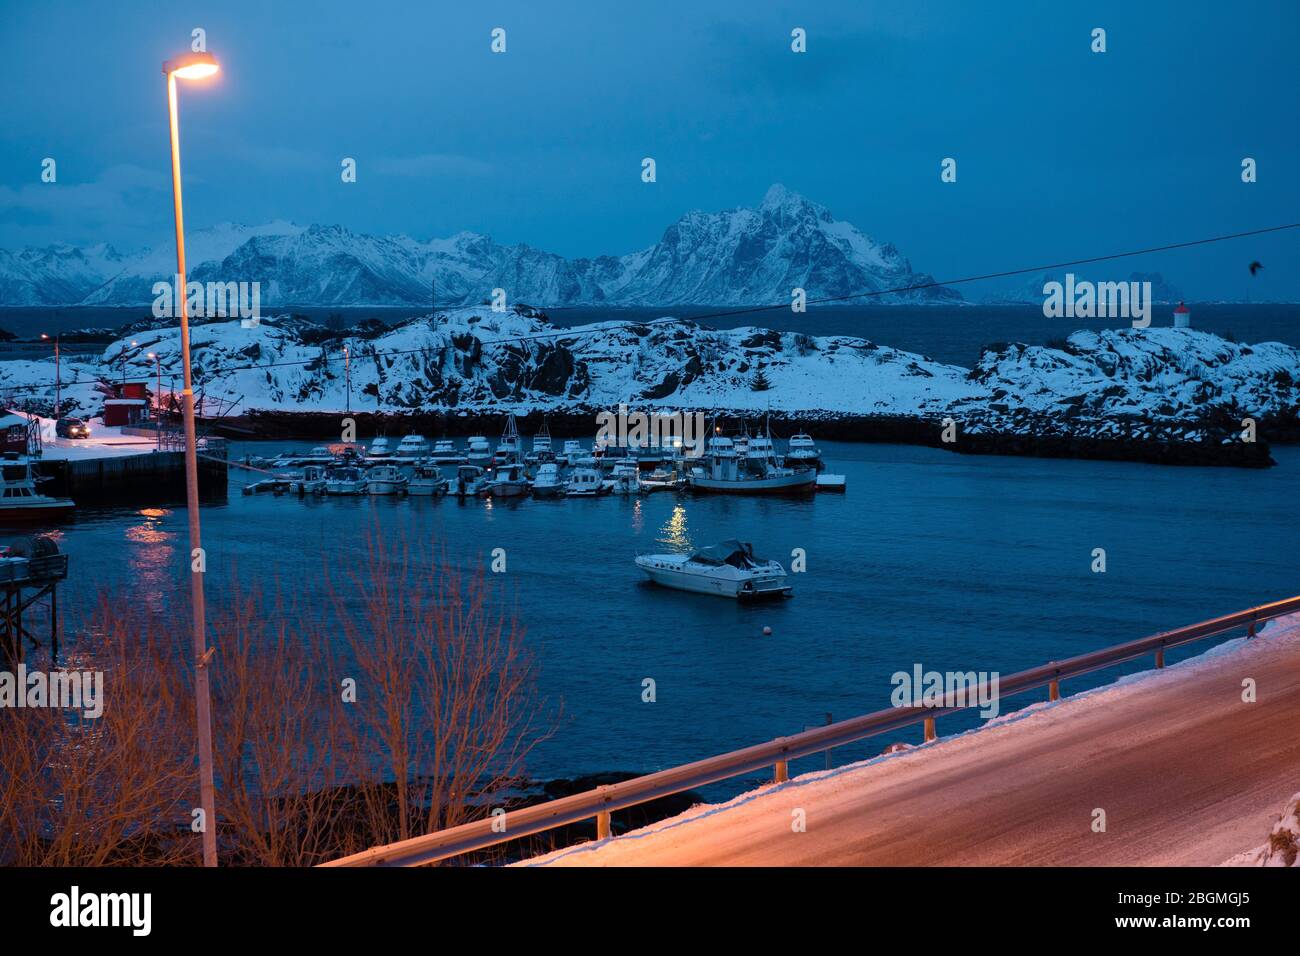 Fishing village, city lights, snowy mountains, sea, blue cloudy sky reflected in water at night in winter. Landscape at night in Lofoten islands Stock Photo